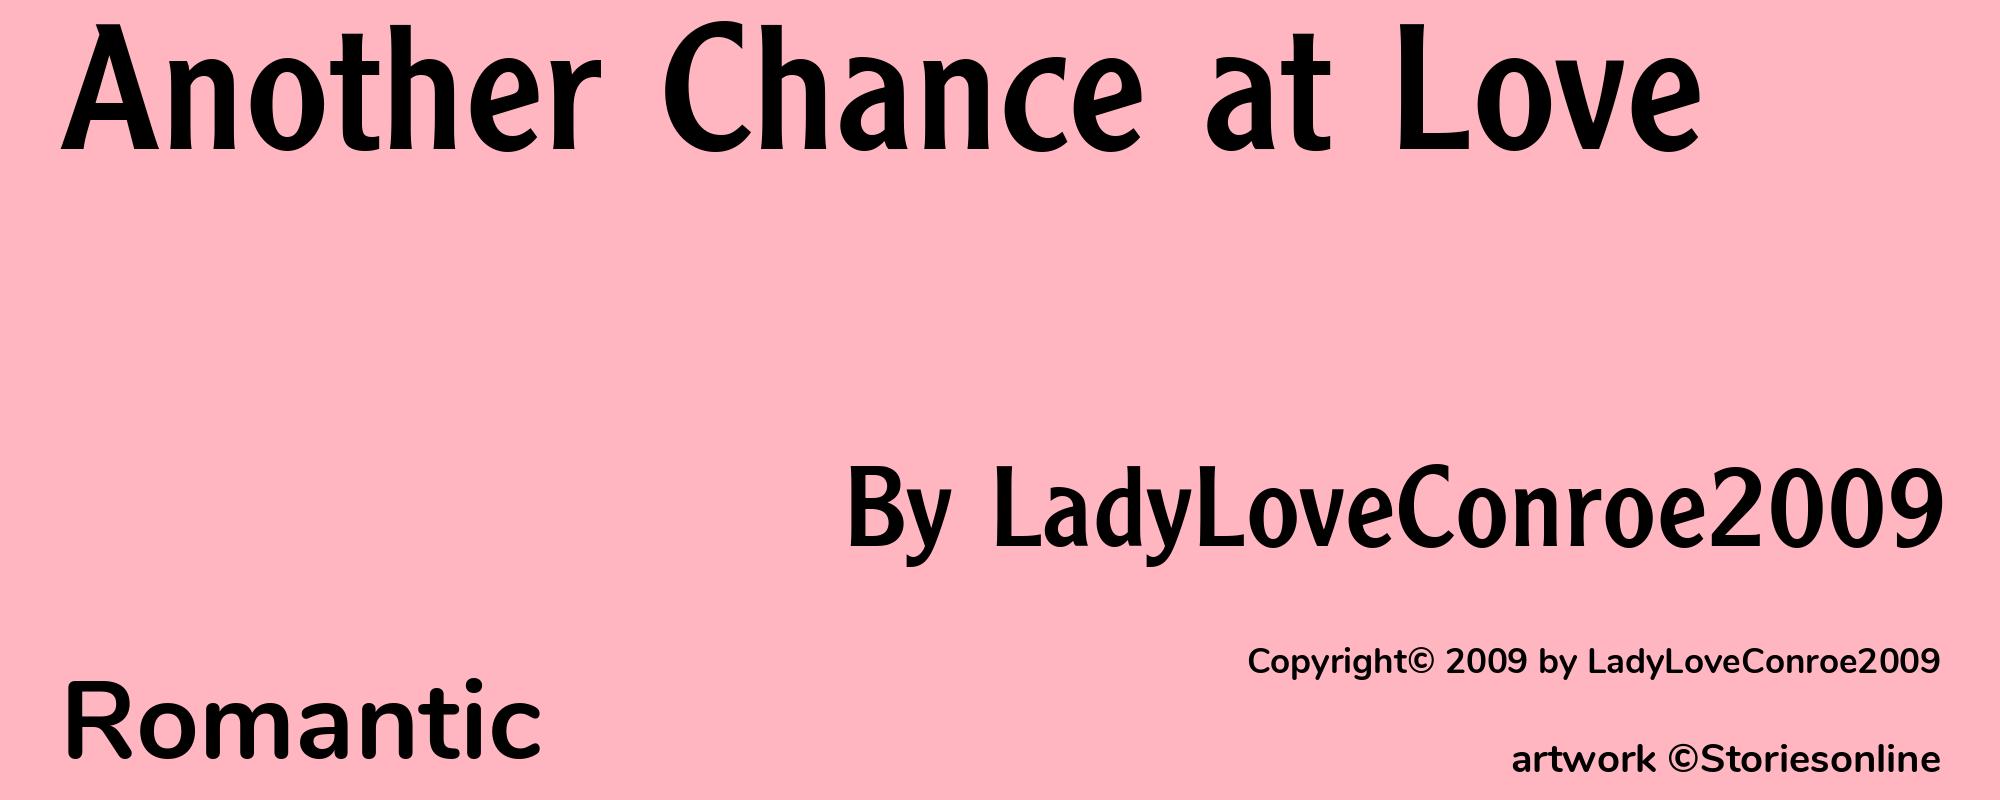 Another Chance at Love - Cover